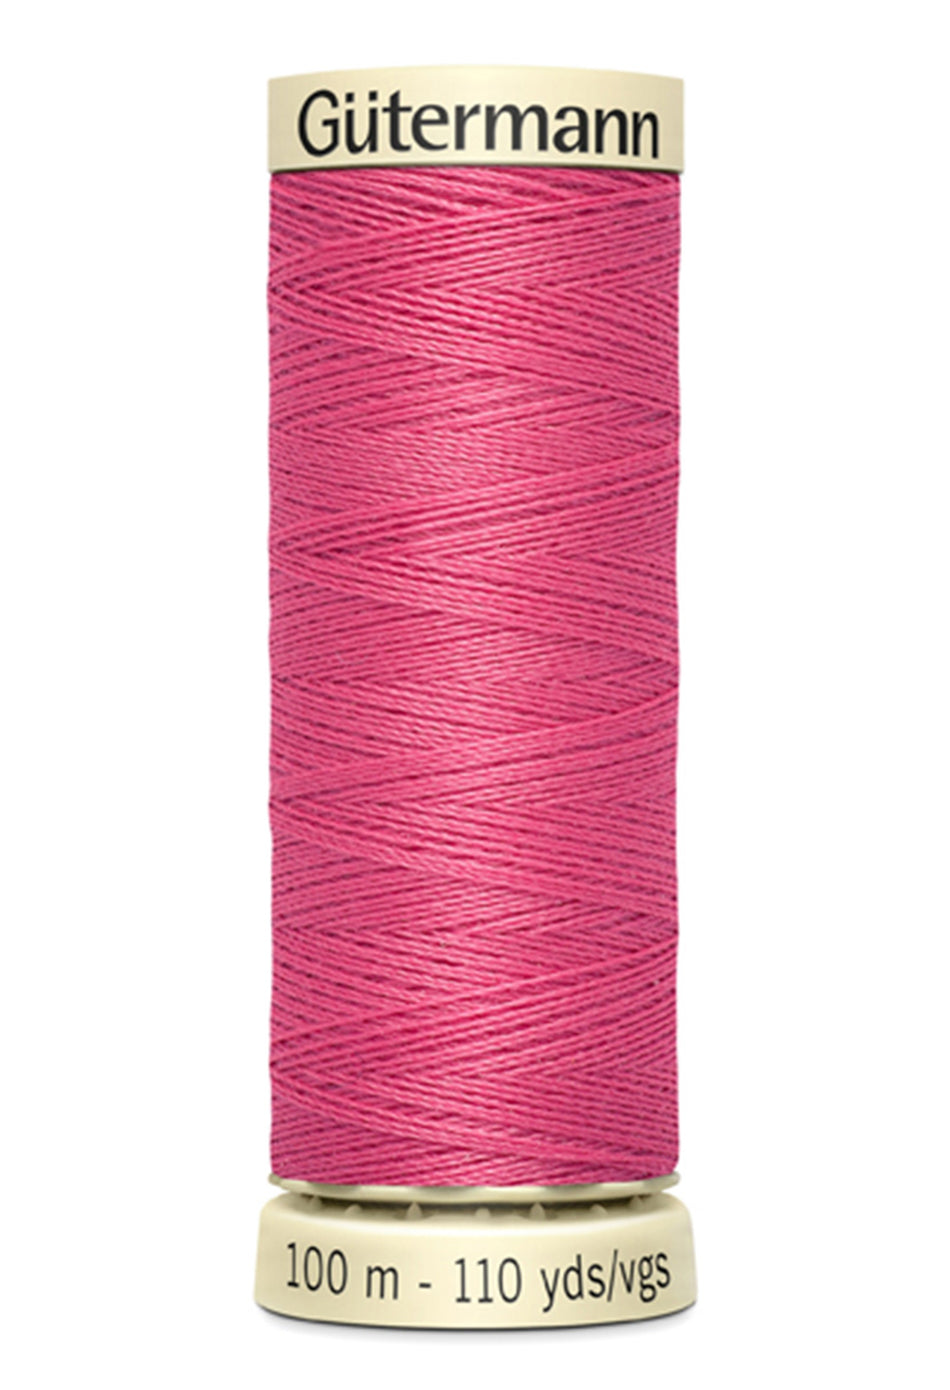 Gutermann Sew-All Polyester 330 Hot Pink 100m/110yd